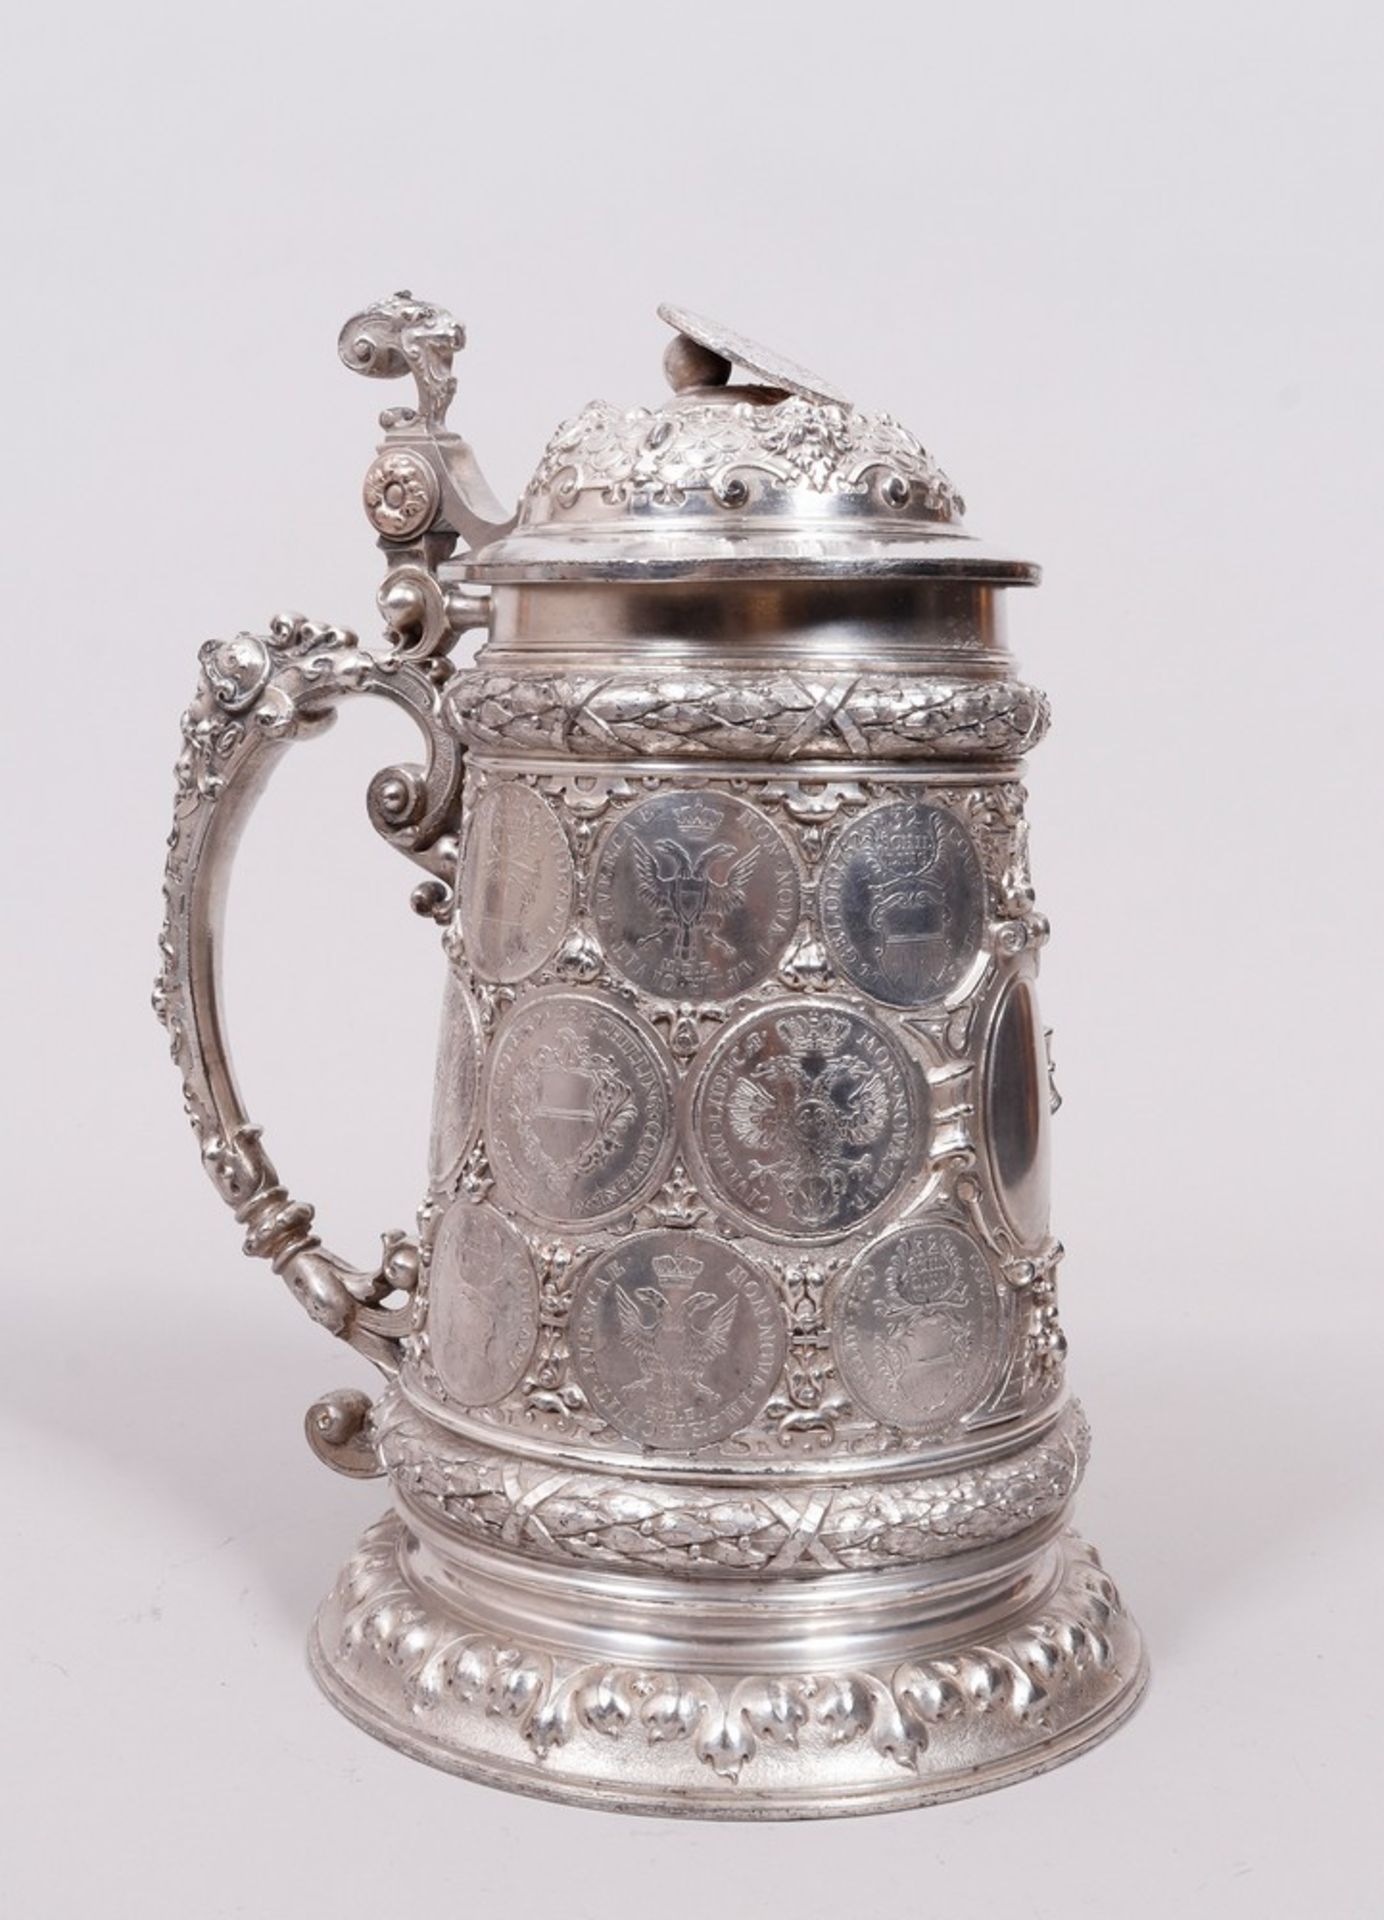 Historicism coin tankard, silver-plated, WMF, Geislingen, c. 1900 - Image 5 of 7